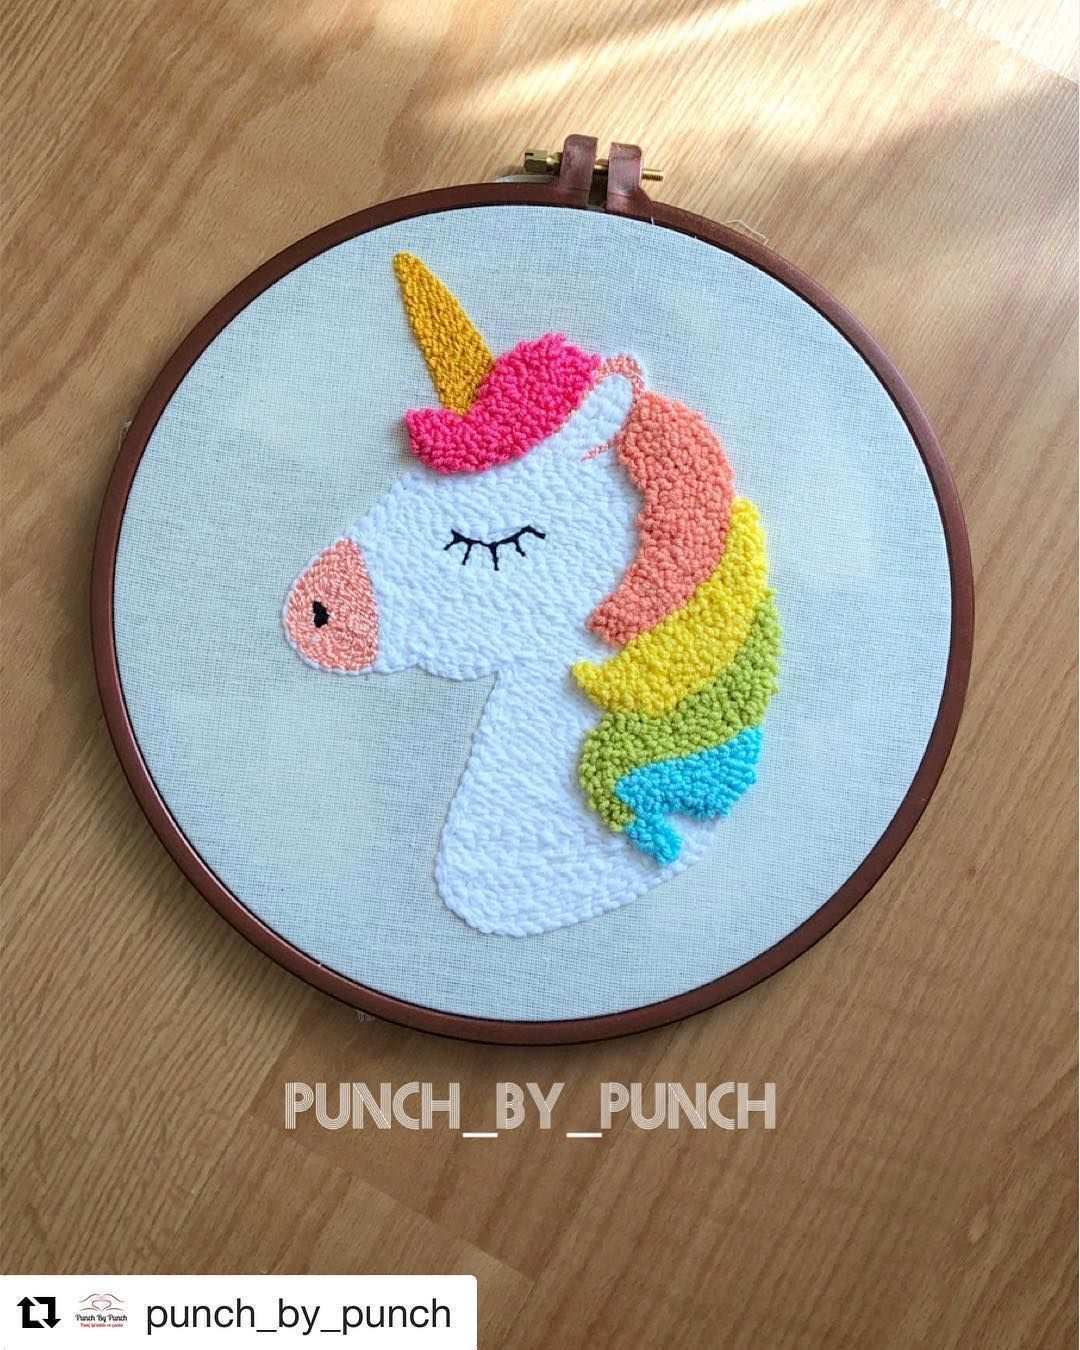 Elif Oner On Instagram Cok Sevdigimle Tbt Yapalim Repost Punch By Punc In 2020 Punch Needle Patterns Punch Needle Embroidery Punch Needle